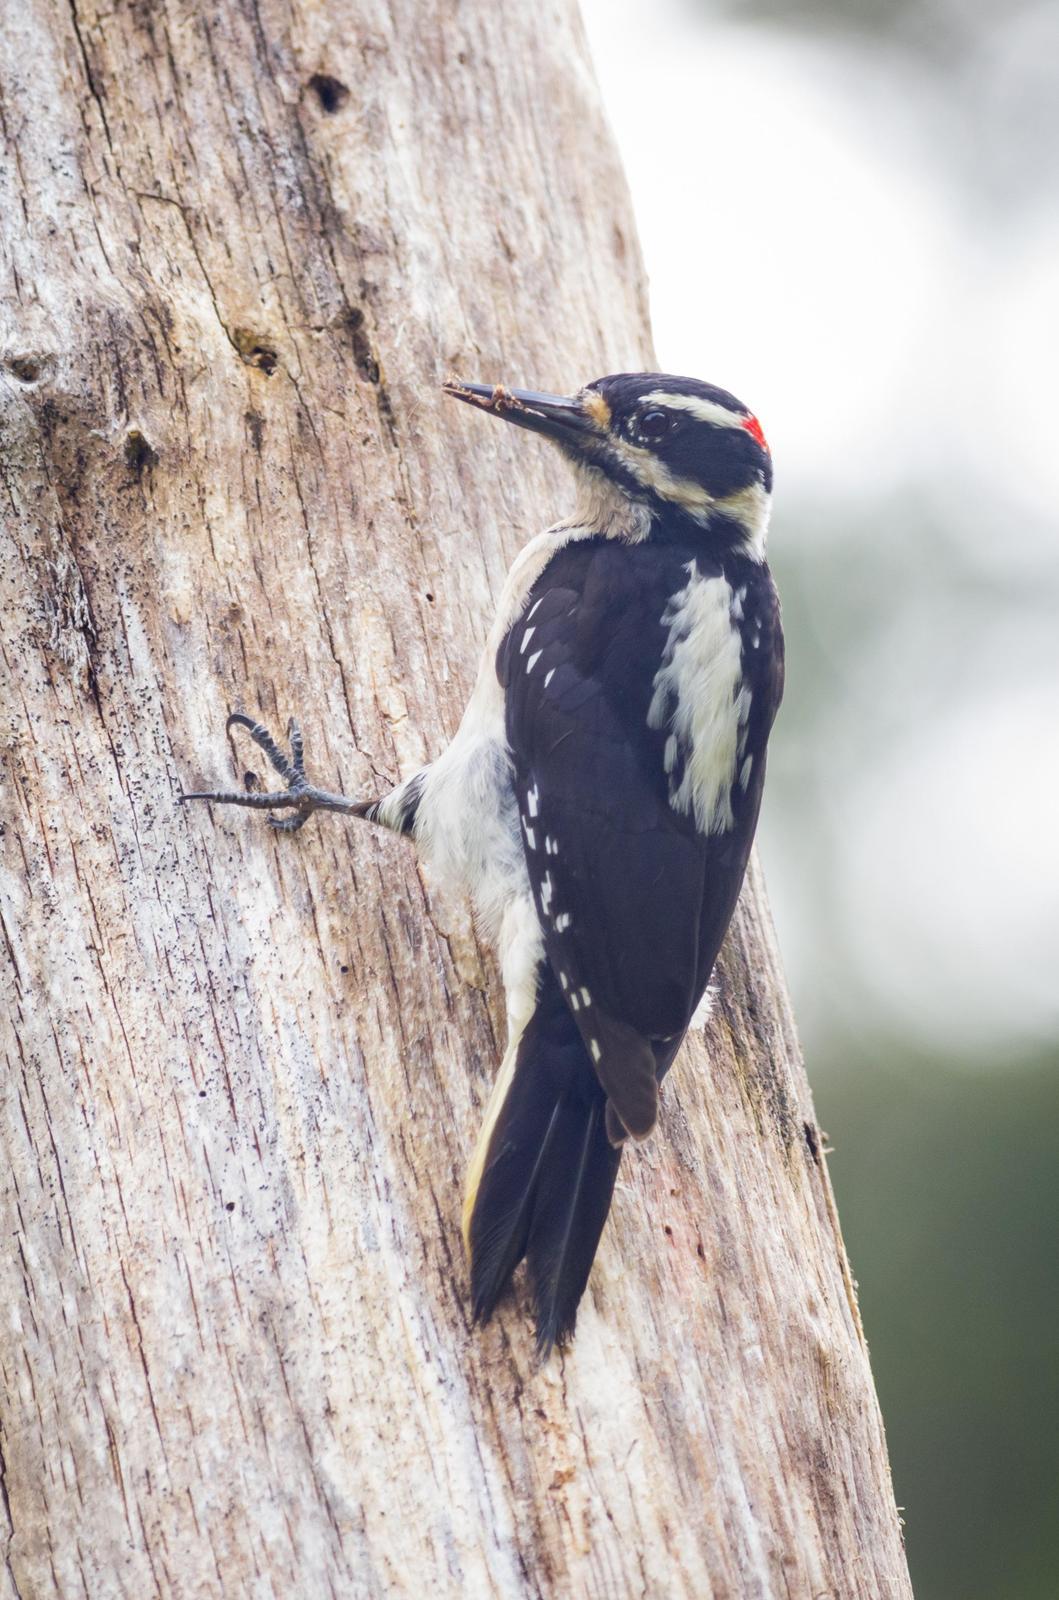 Hairy Woodpecker Photo by Jesse Hodges